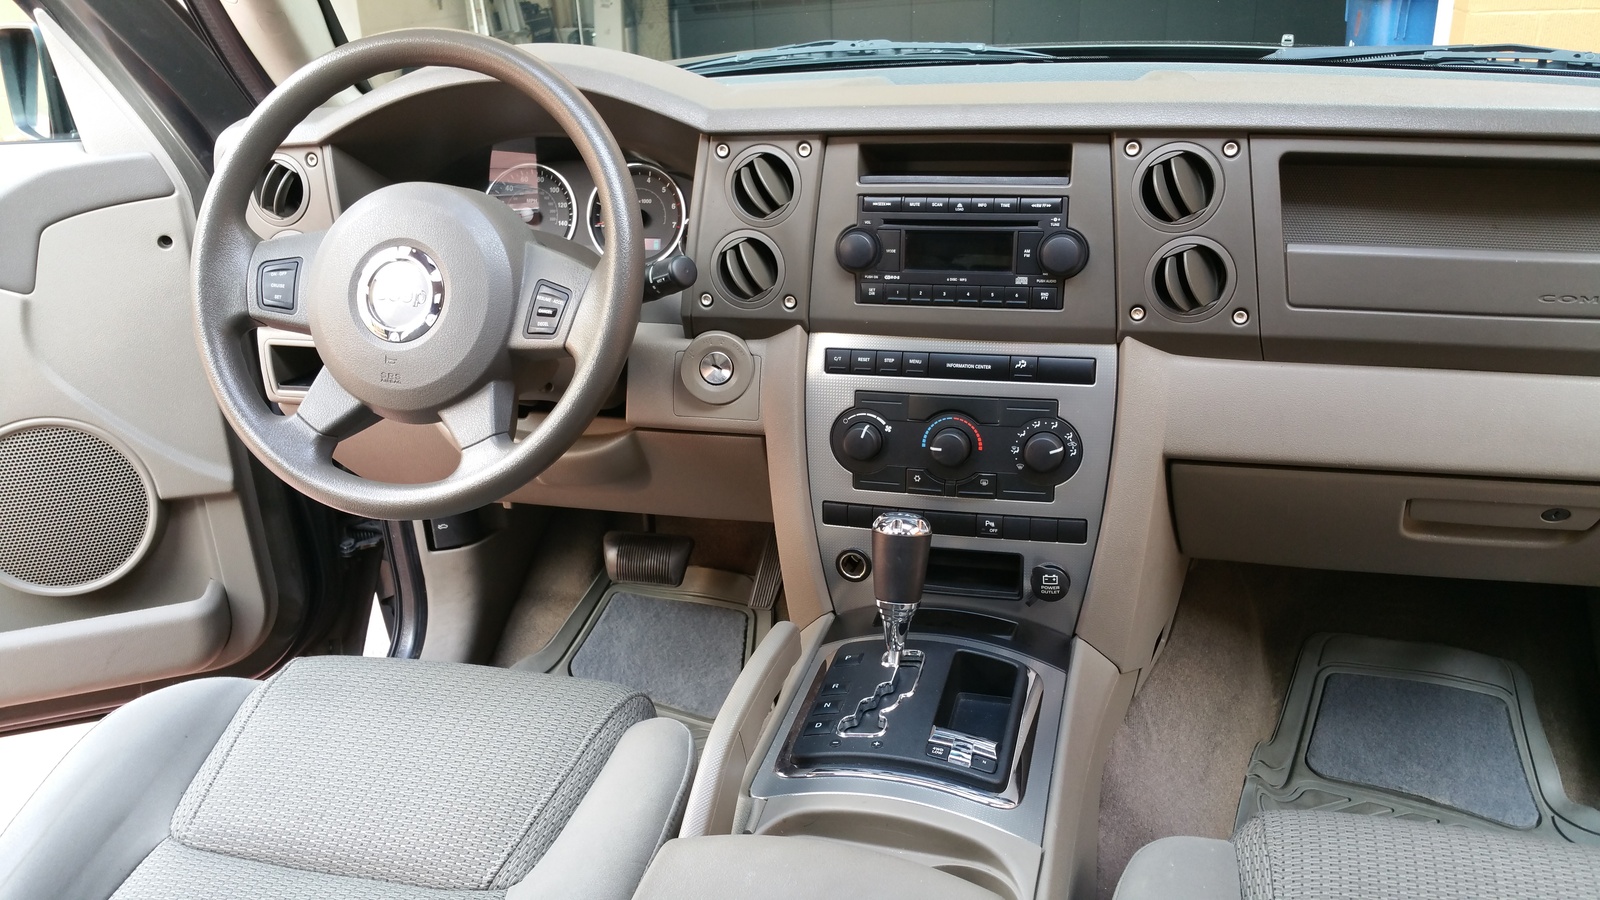 2006 Jeep Commander: Prices, Reviews & Pictures - CarGurus